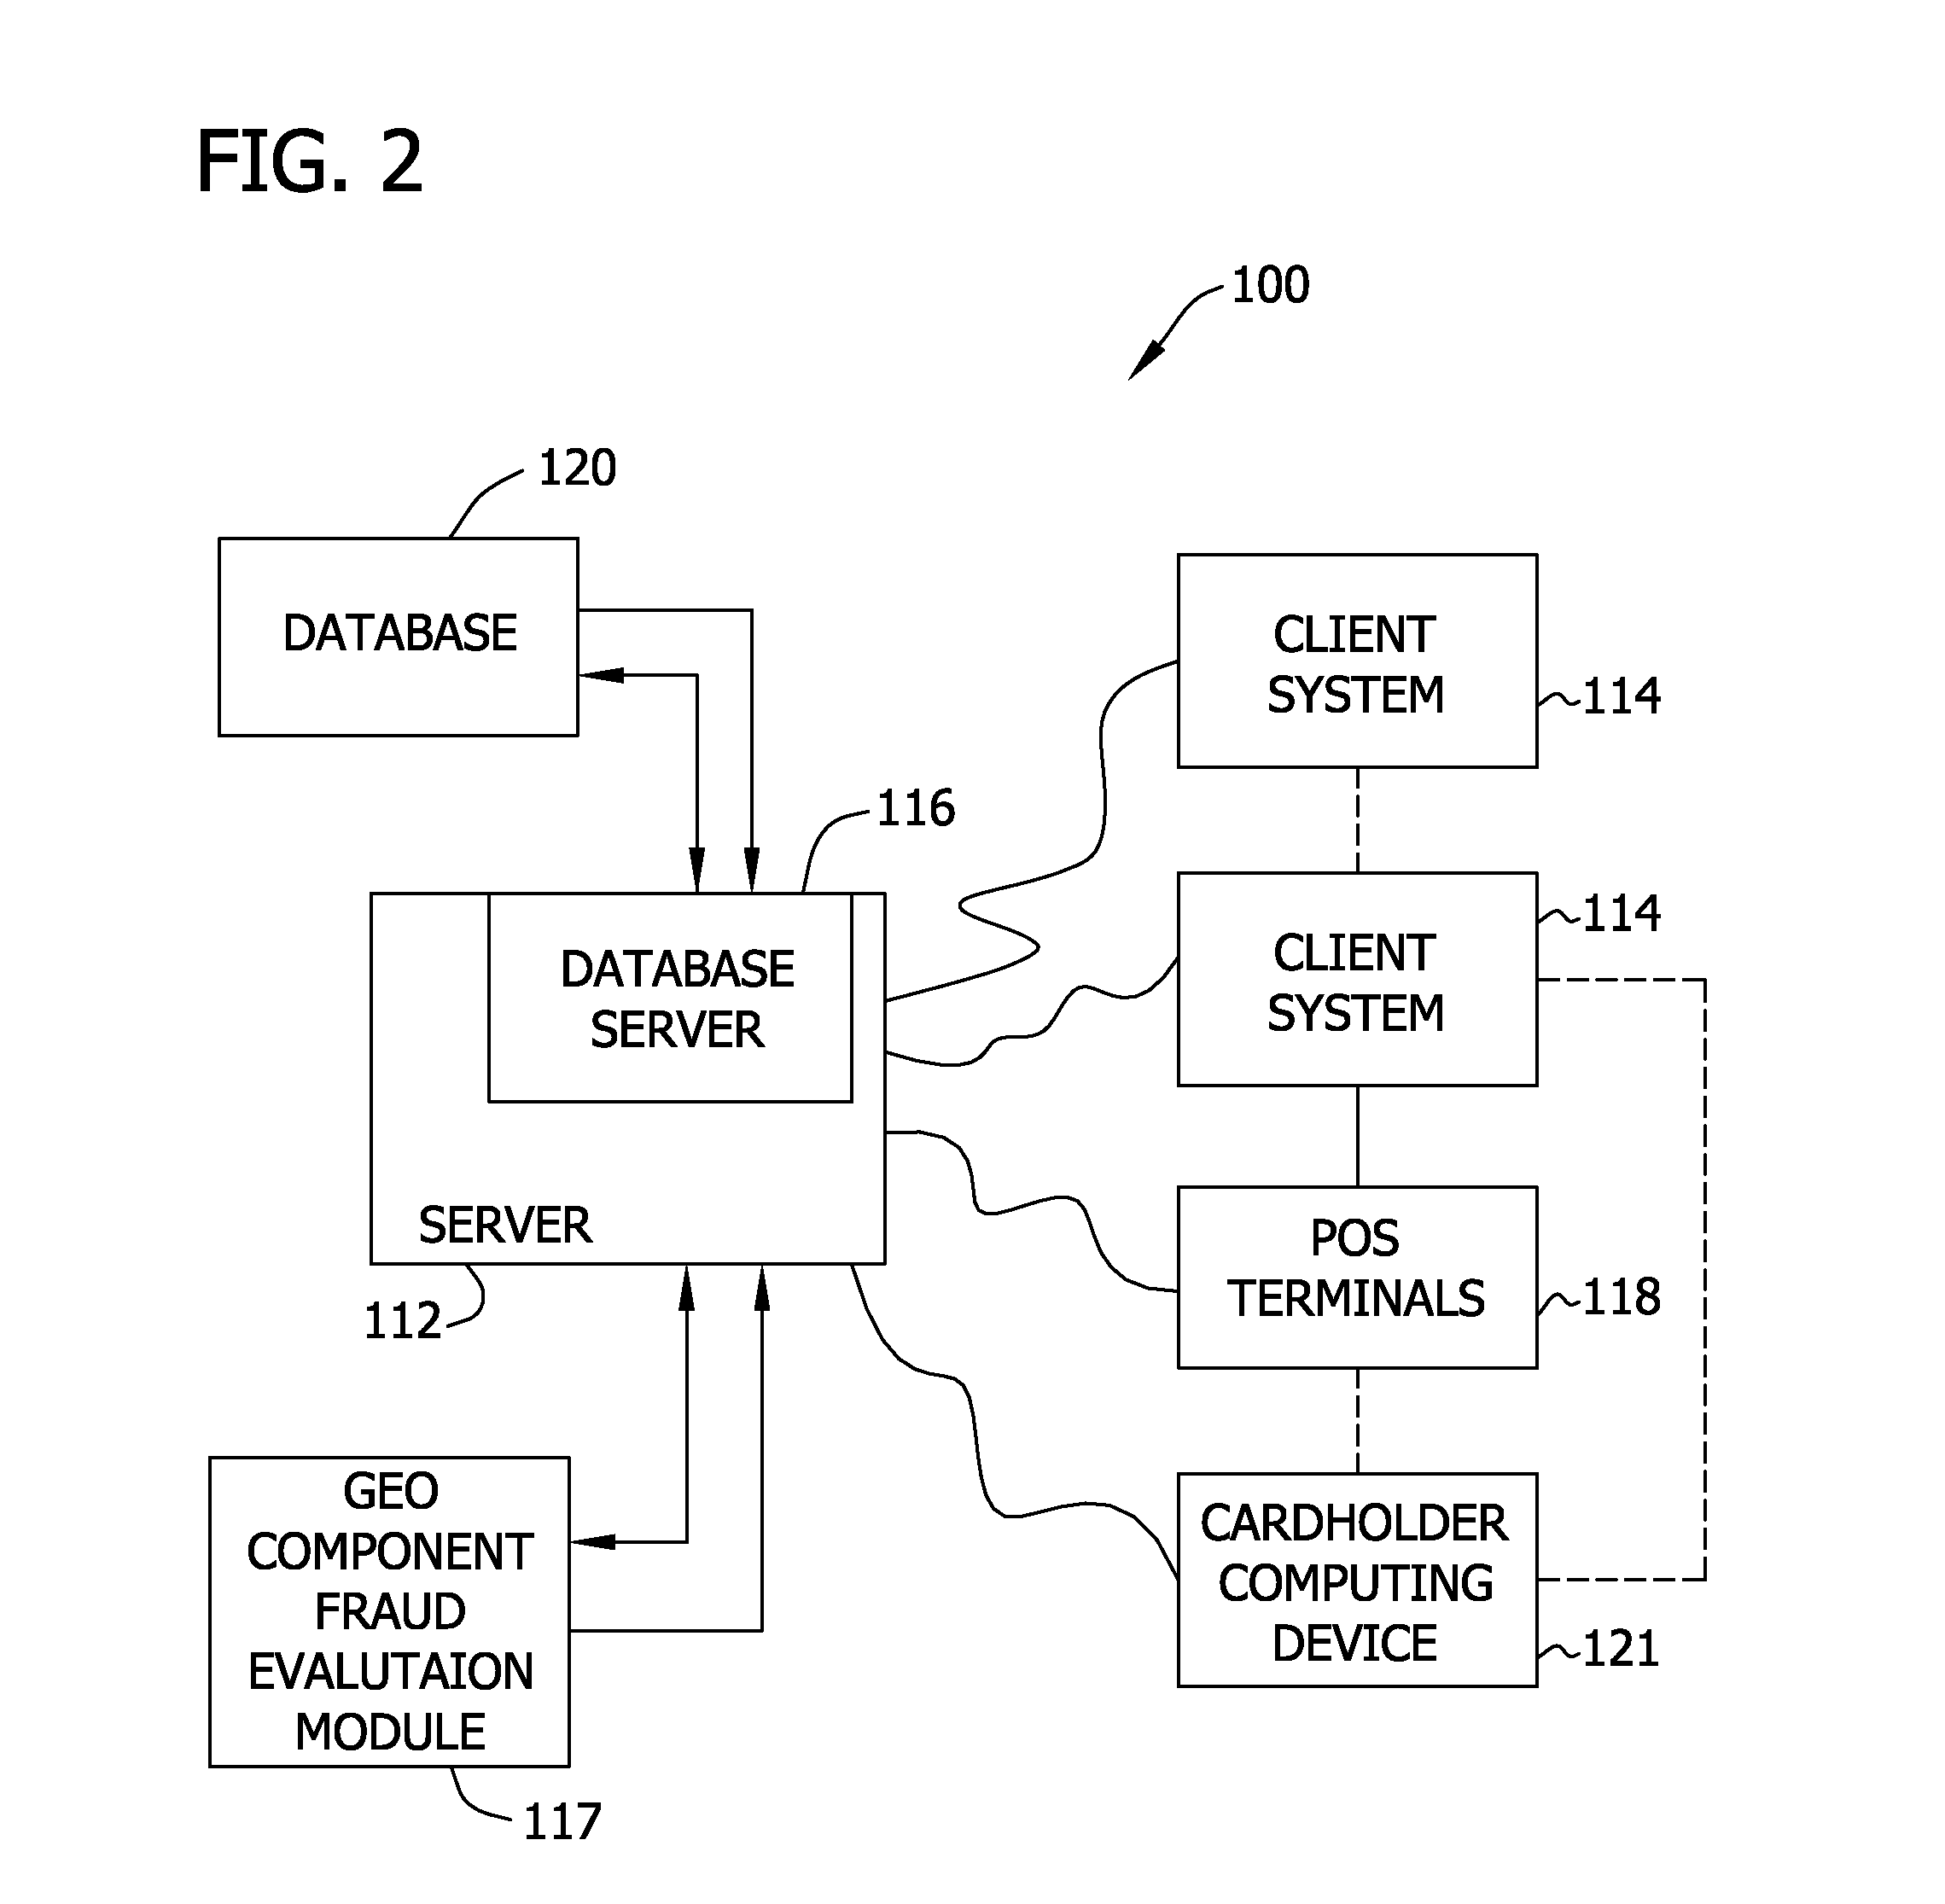 Systems and methods for geo component fraud detection for card-present transactions